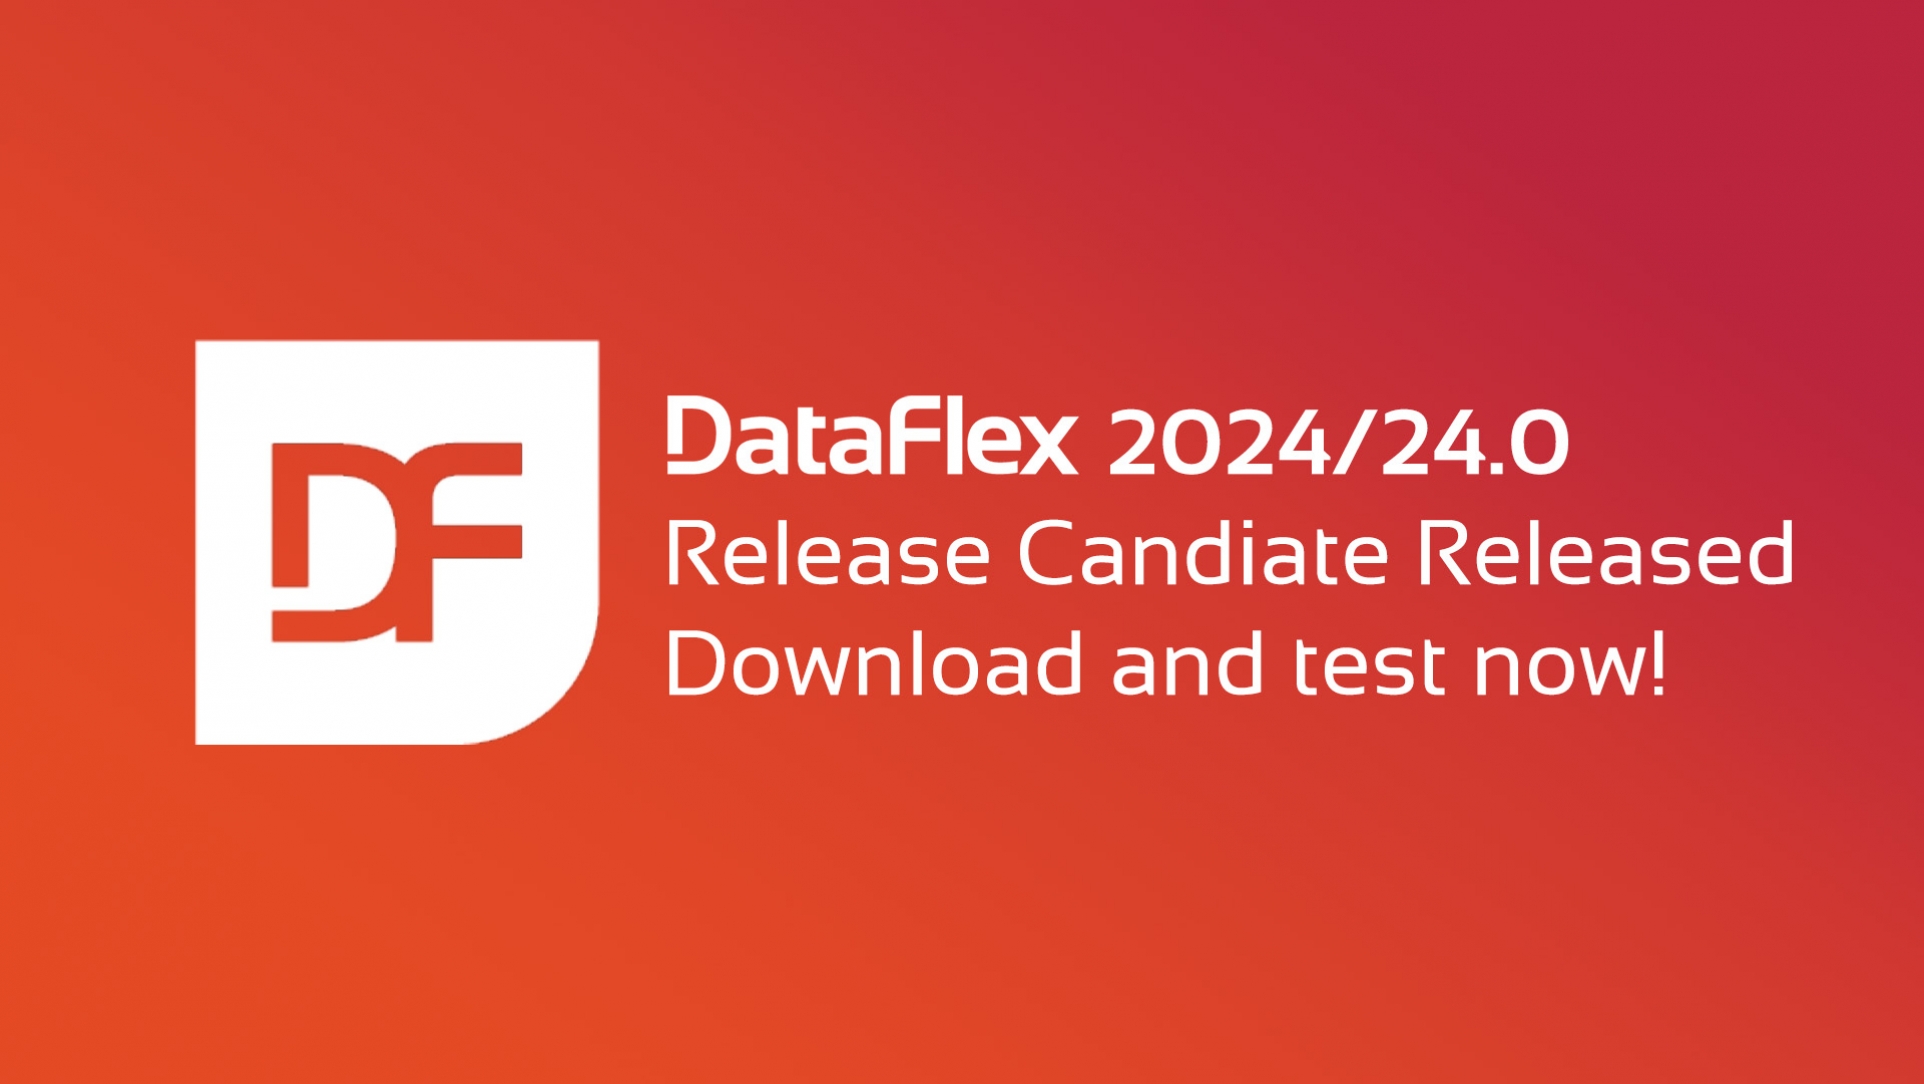 DataFlex 2024 Release Candidate posted!